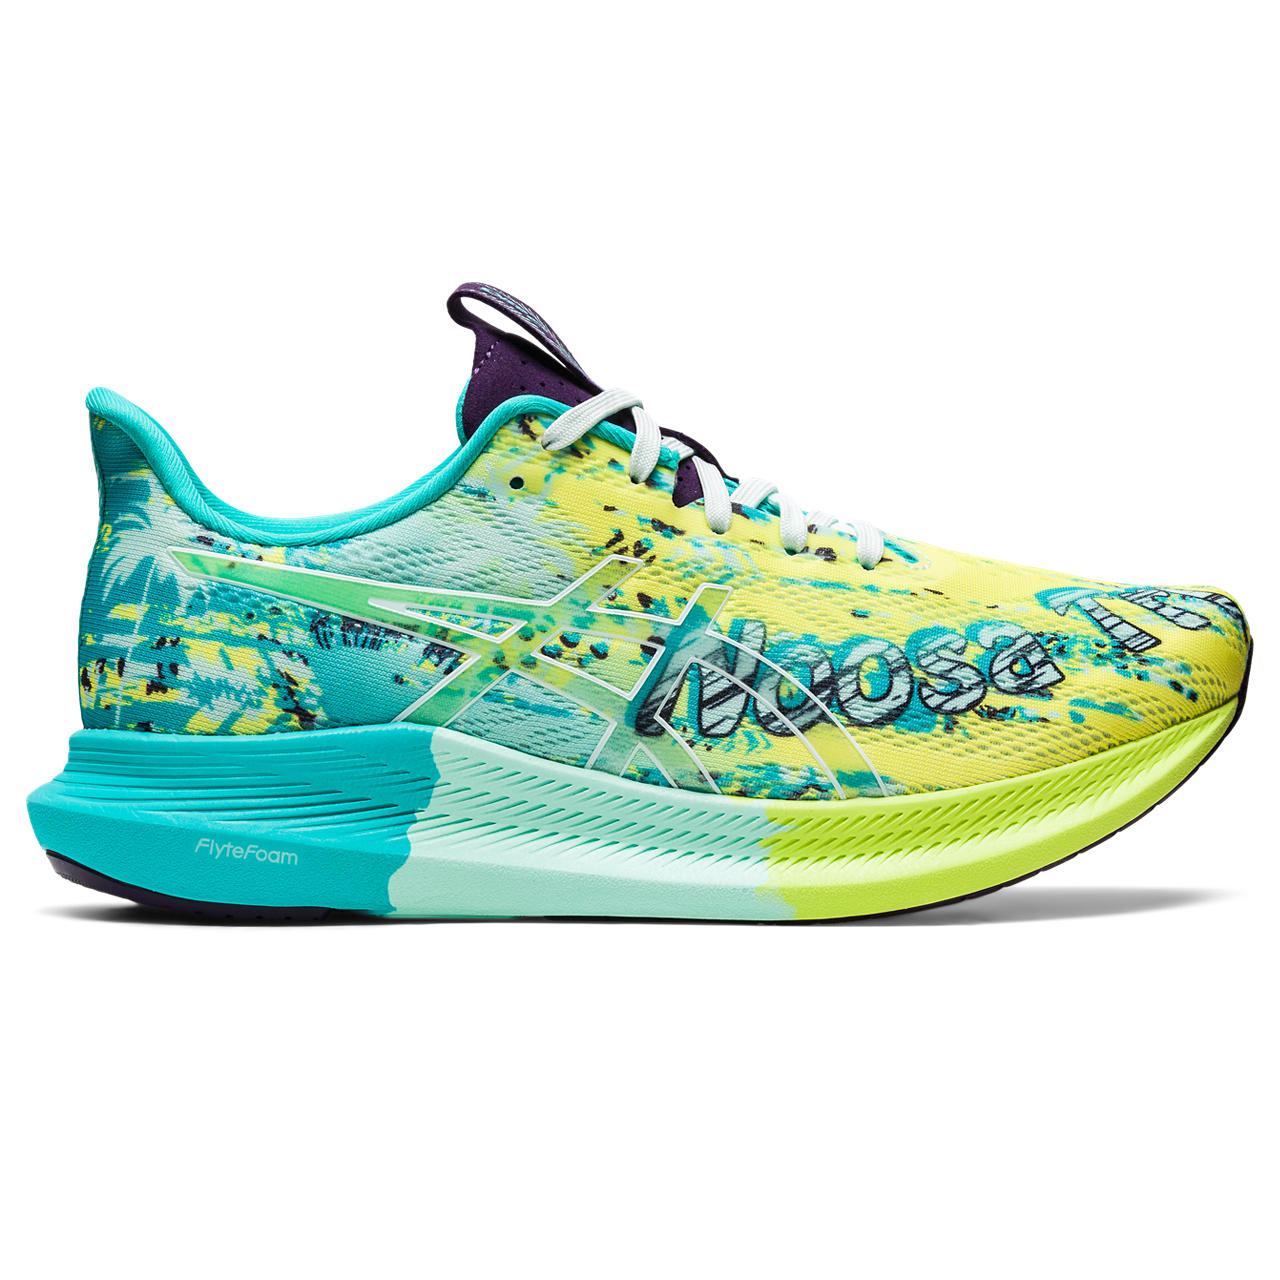 ASICS NOOSA TRI 14, SAFETY YELLOW/SOOTHING SEA, swatch